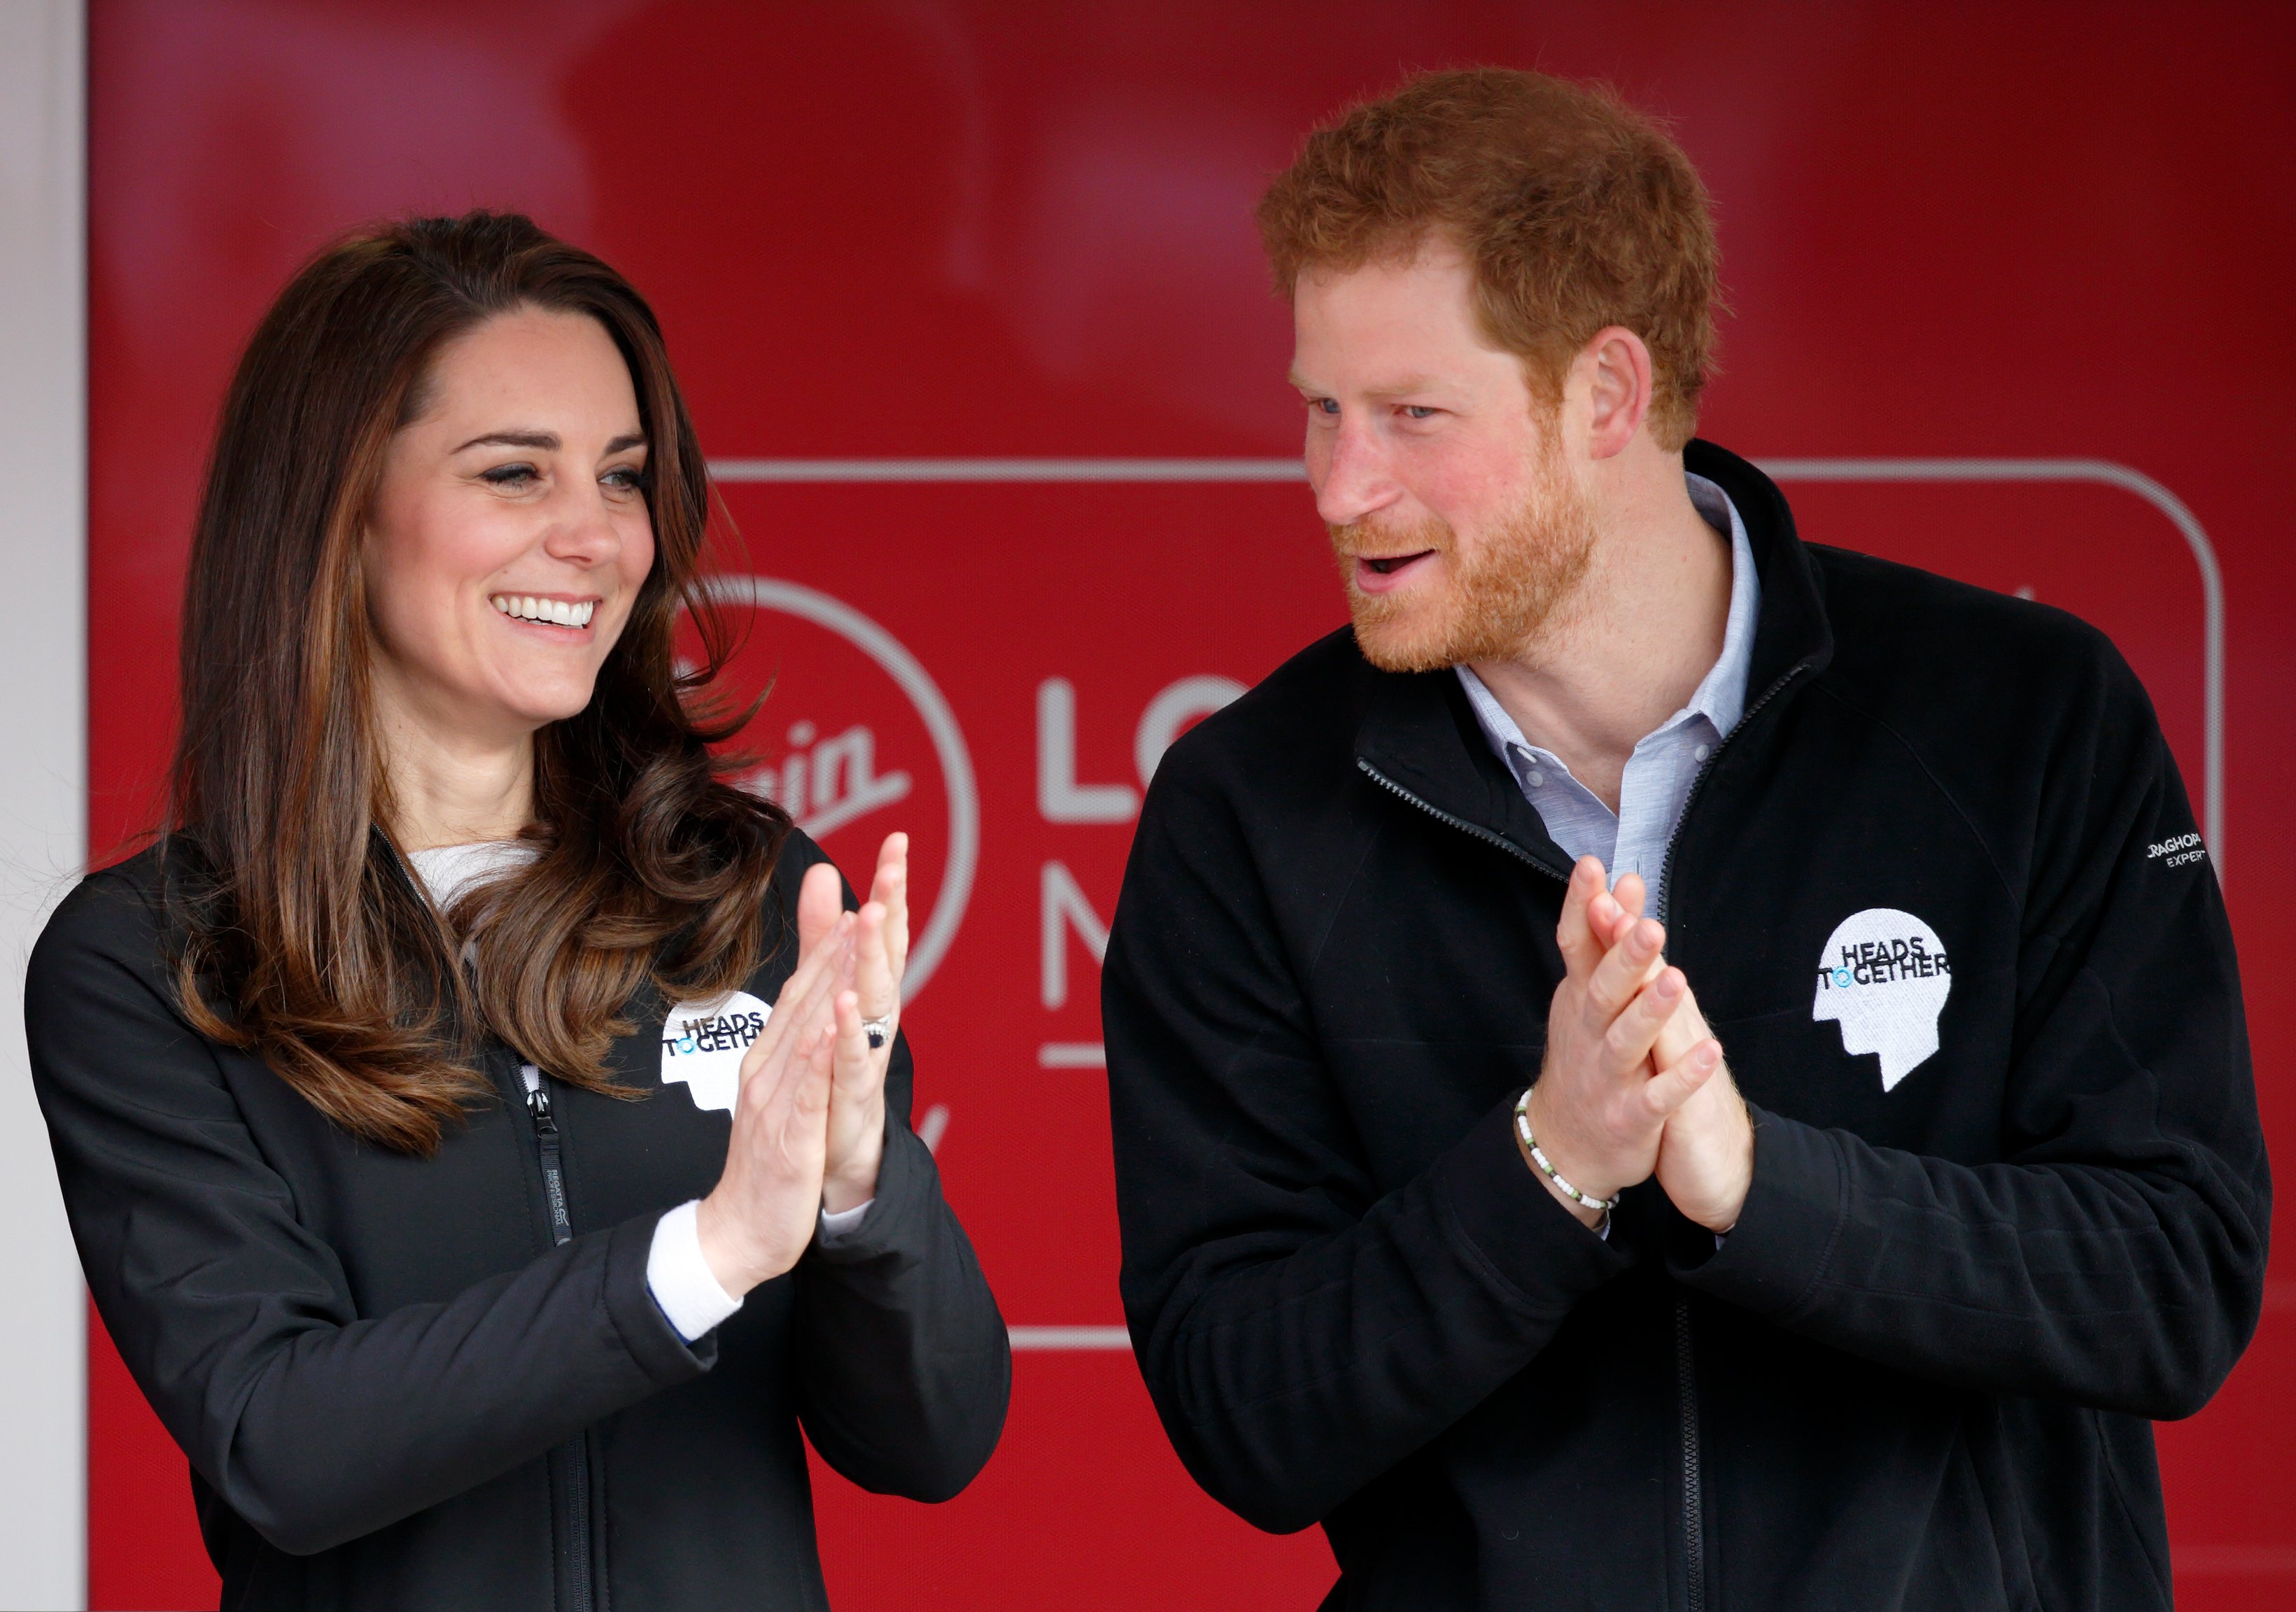 Prince Harry and Kate Middleton during the start of the 2017 Virgin Money London Marathon on April 23, 2017 in London, England. | Source: Getty Images